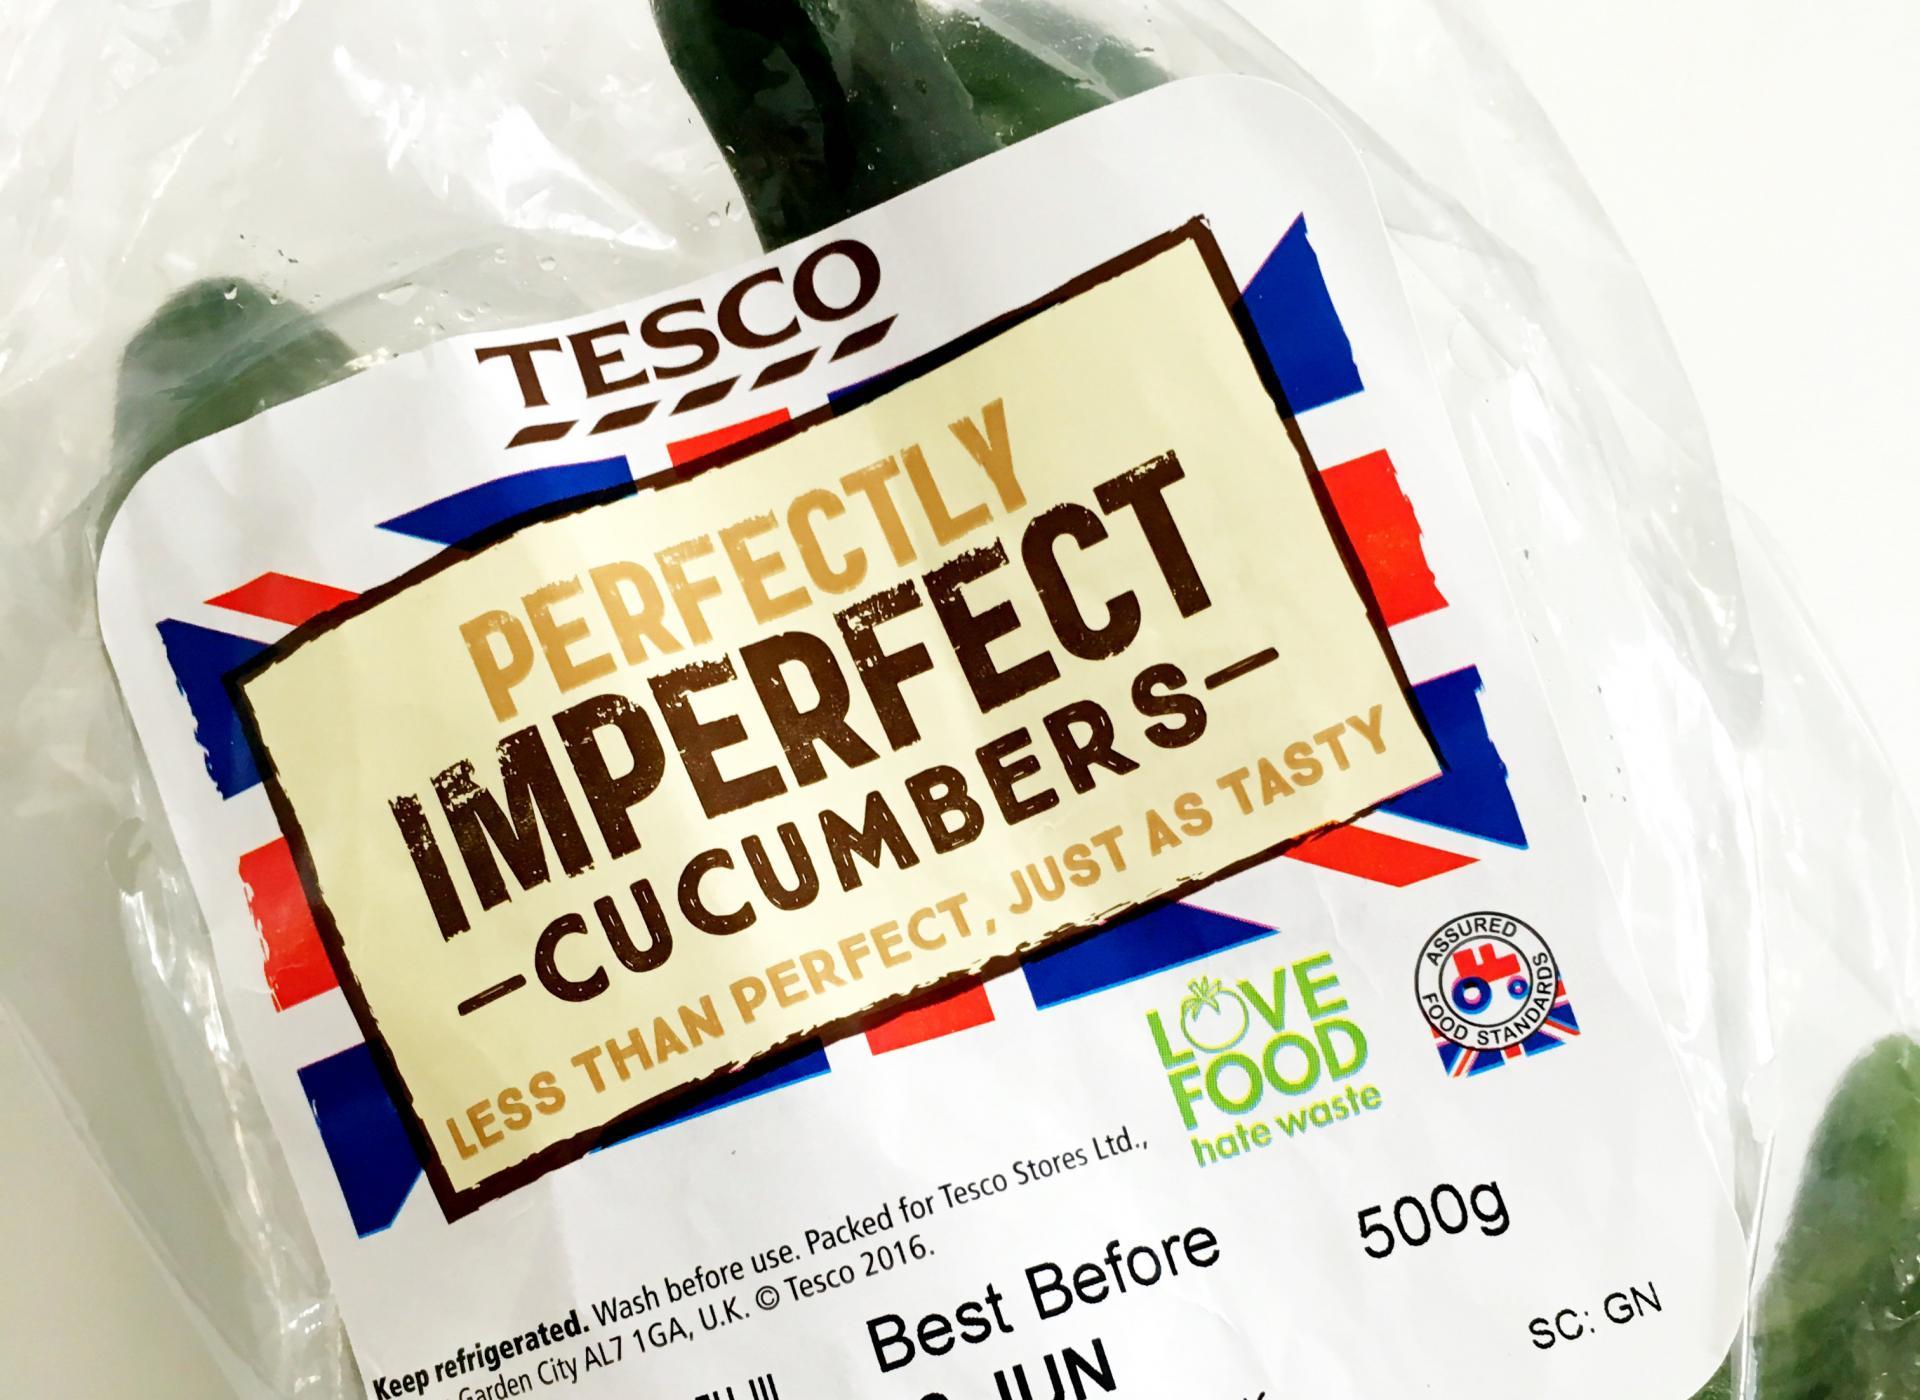 Cucumbers from Tesco sold as 'perfectly imperfect'